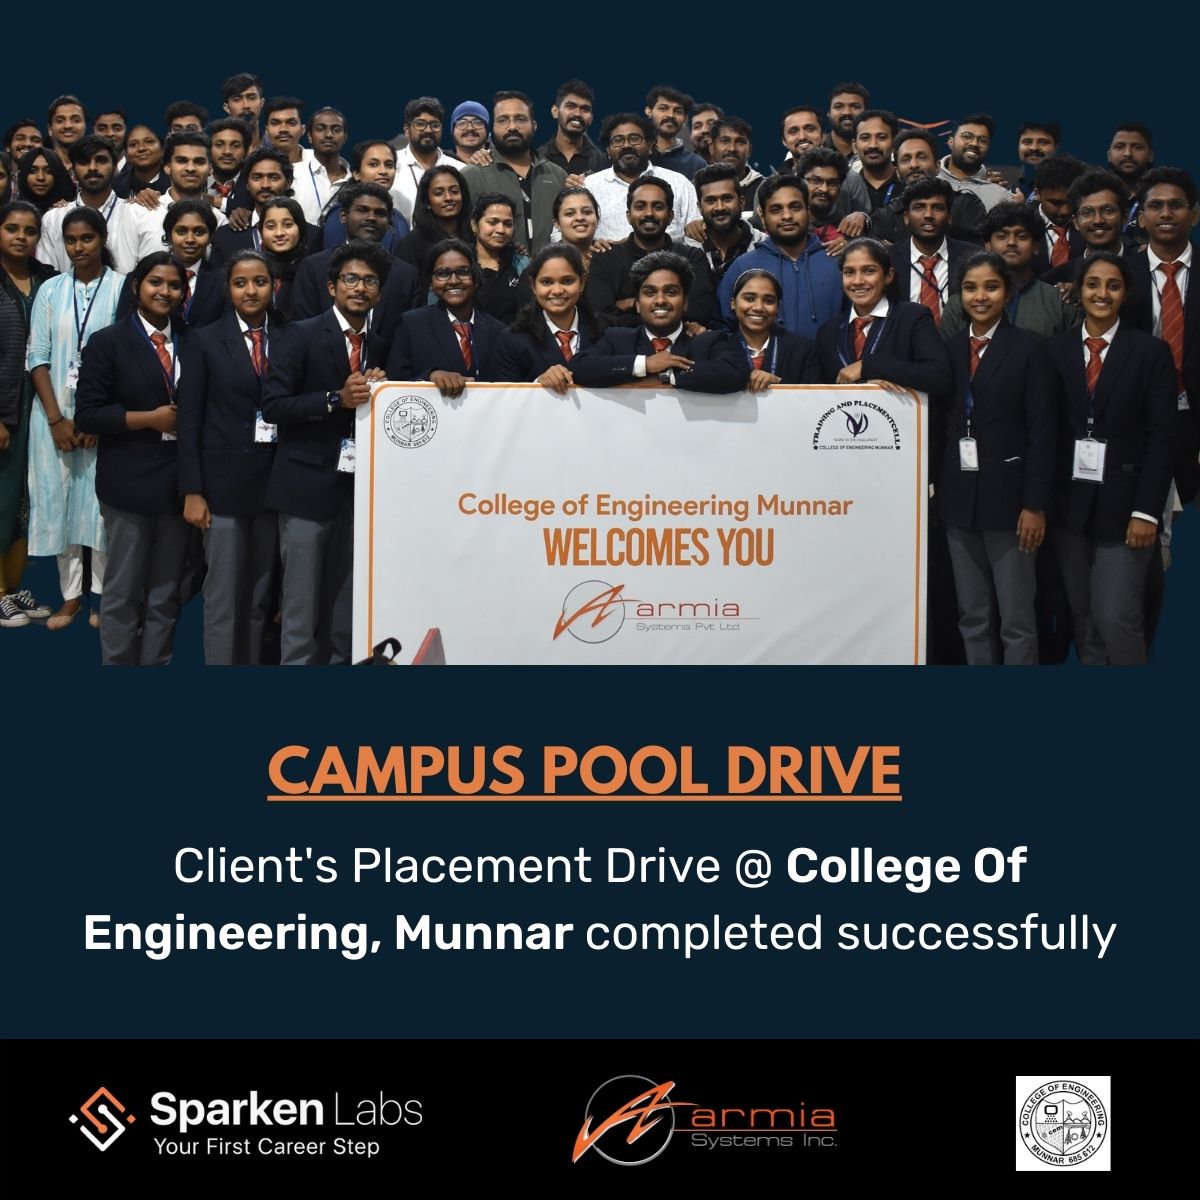 Client's Placement Drive @ College Of Engineering, Munnar completed successfully